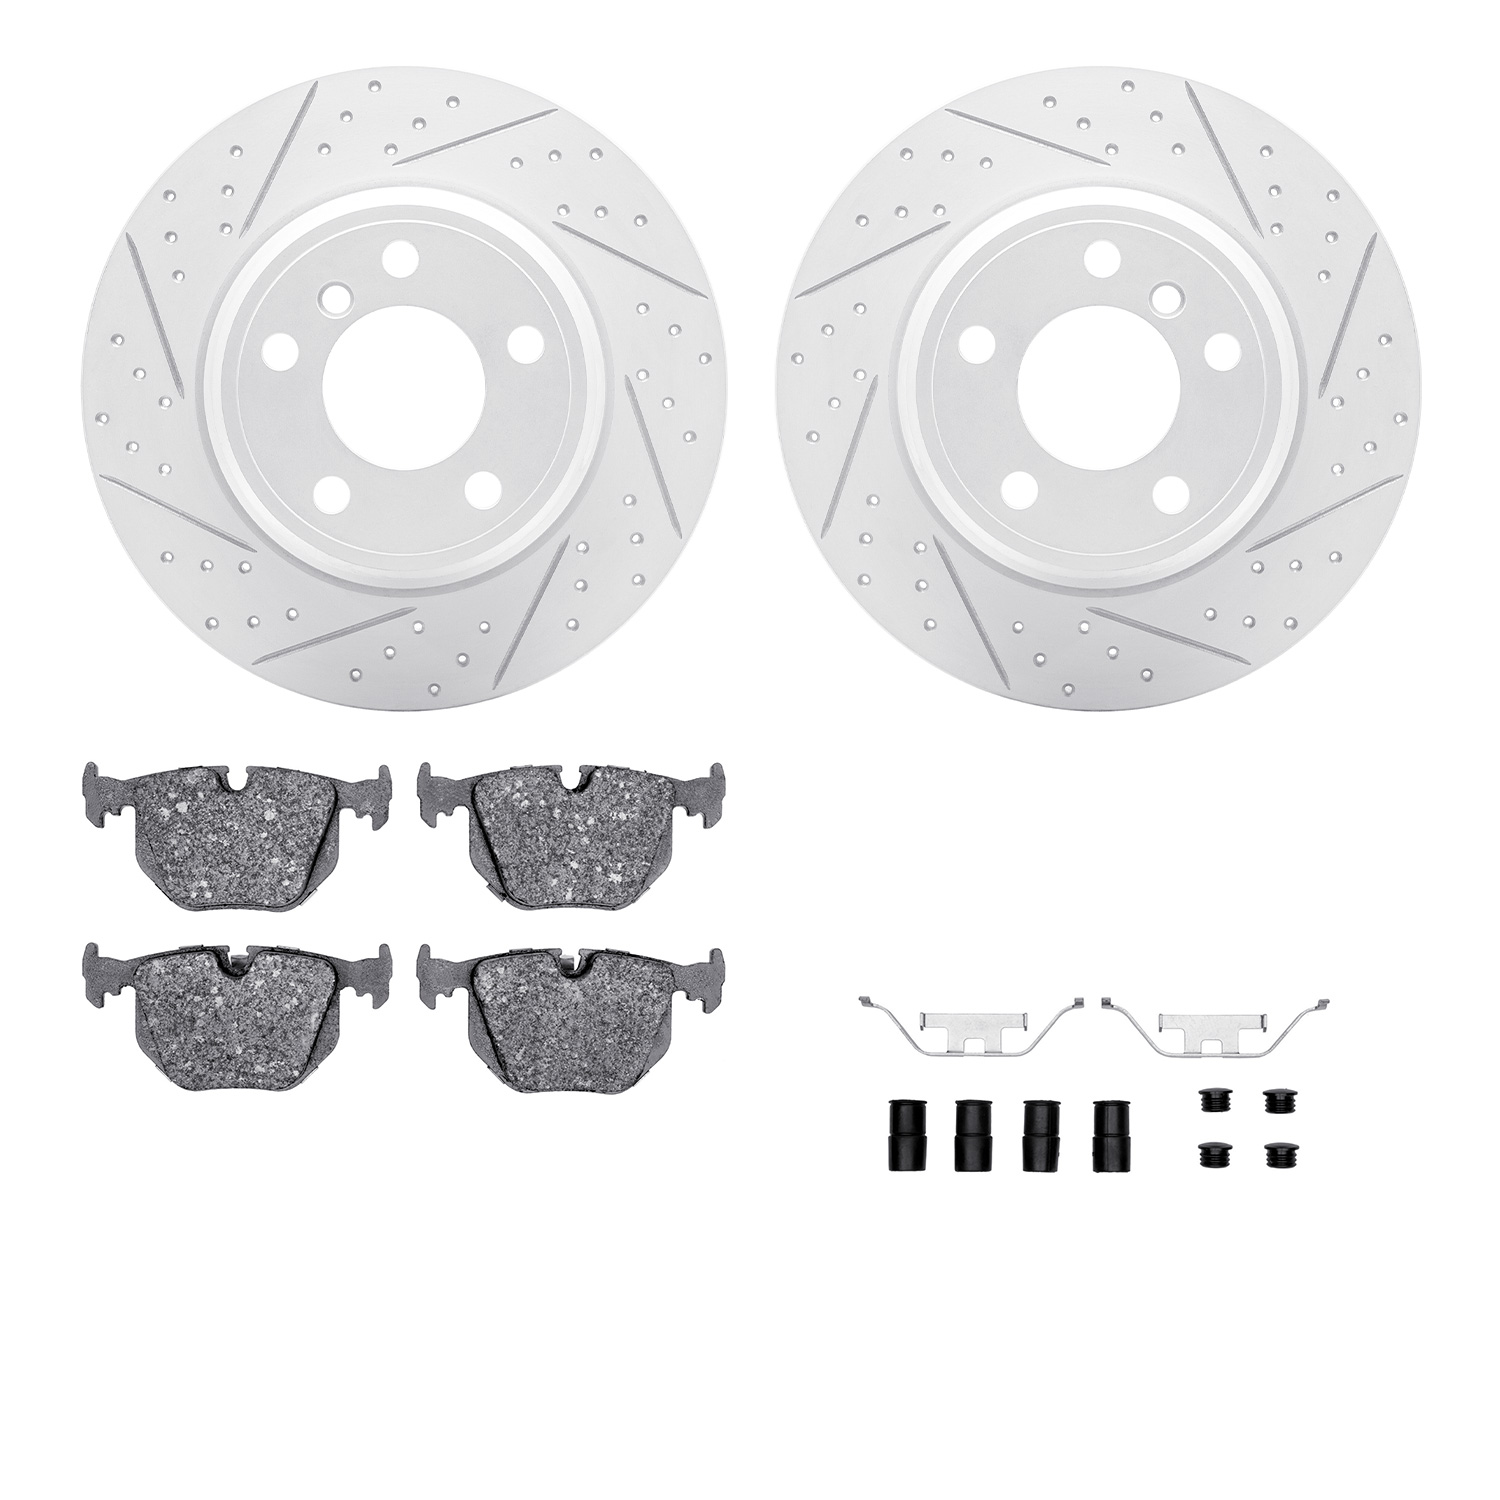 2512-31098 Geoperformance Drilled/Slotted Rotors w/5000 Advanced Brake Pads Kit & Hardware, 2000-2006 BMW, Position: Rear